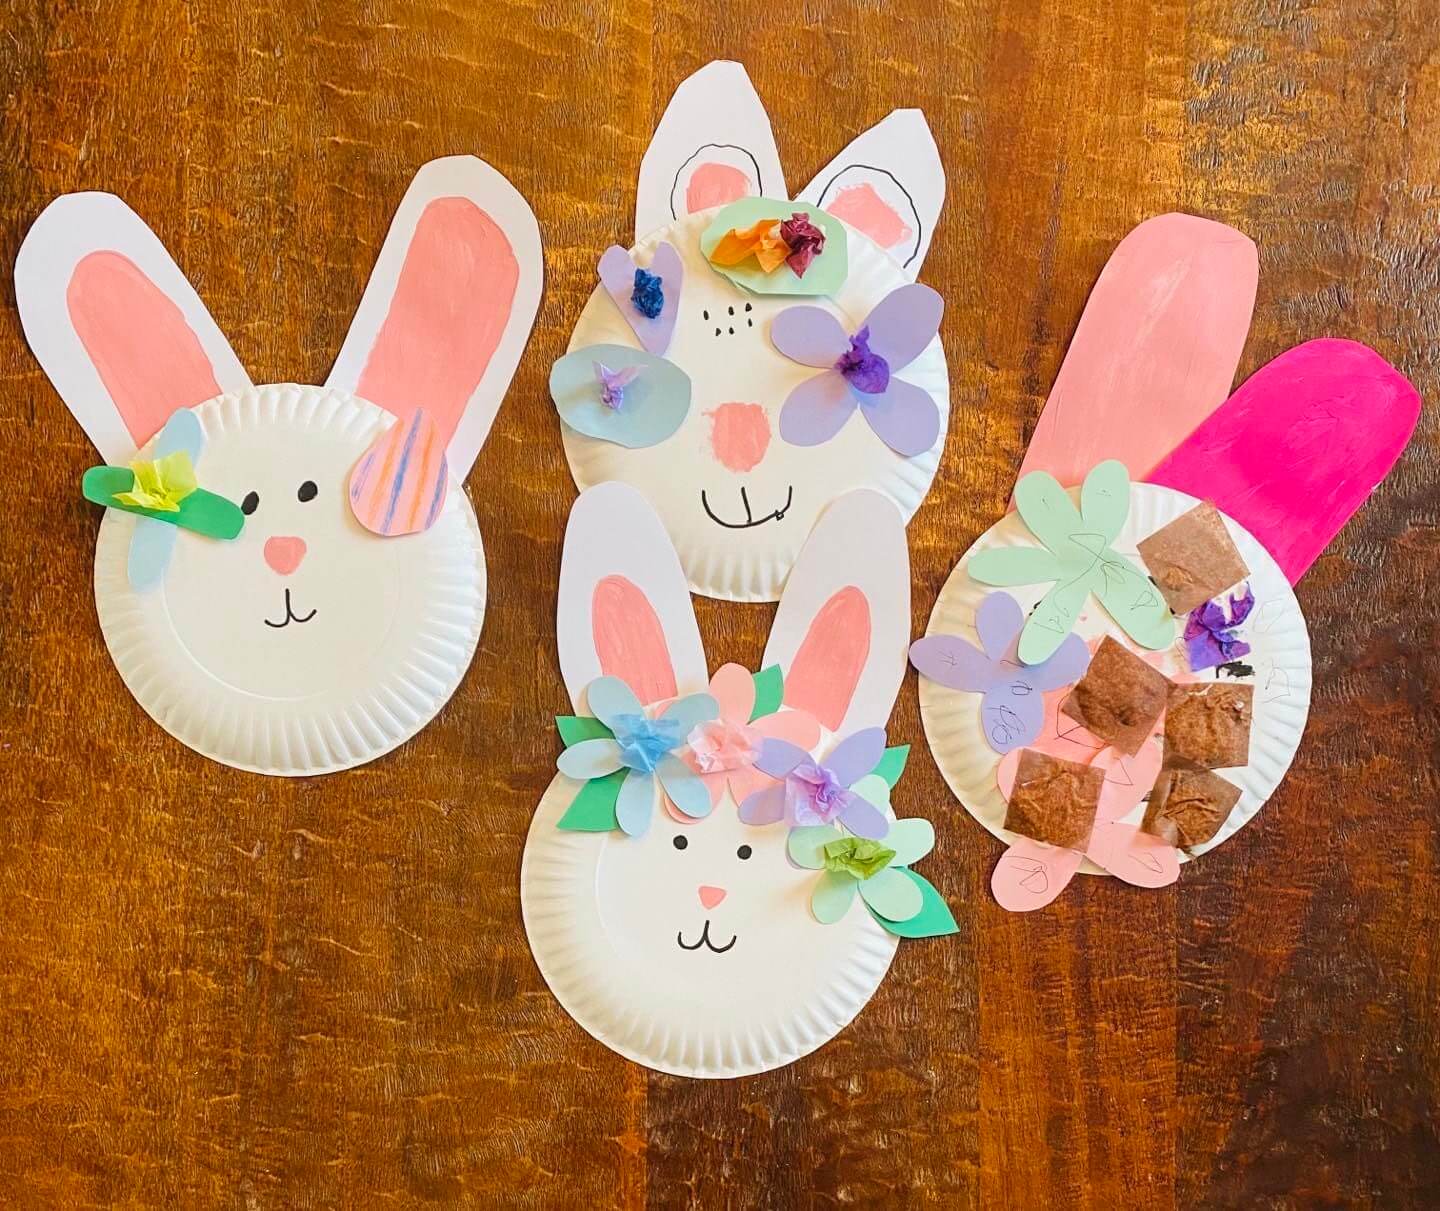 Craft Supply Easter Felt DIY Craft Kit for Kids - Make Your Own Easter Bunny! - Makes 6 Bunnies